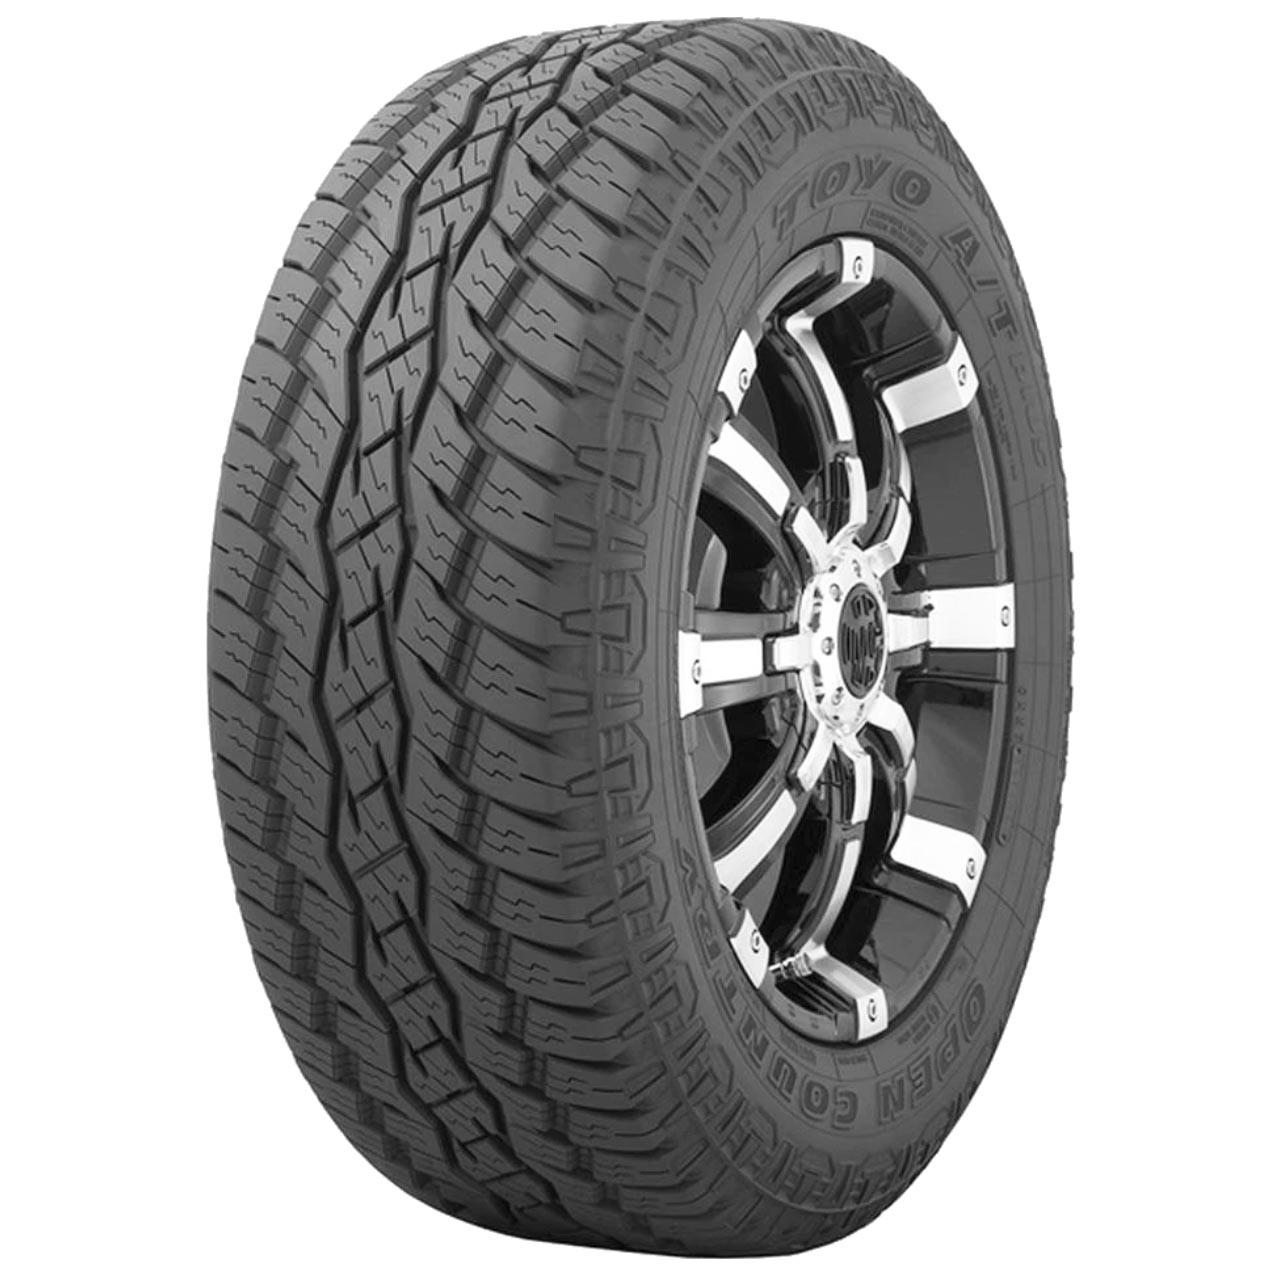 Toyo Open Country AT Plus 255/65R16 109H